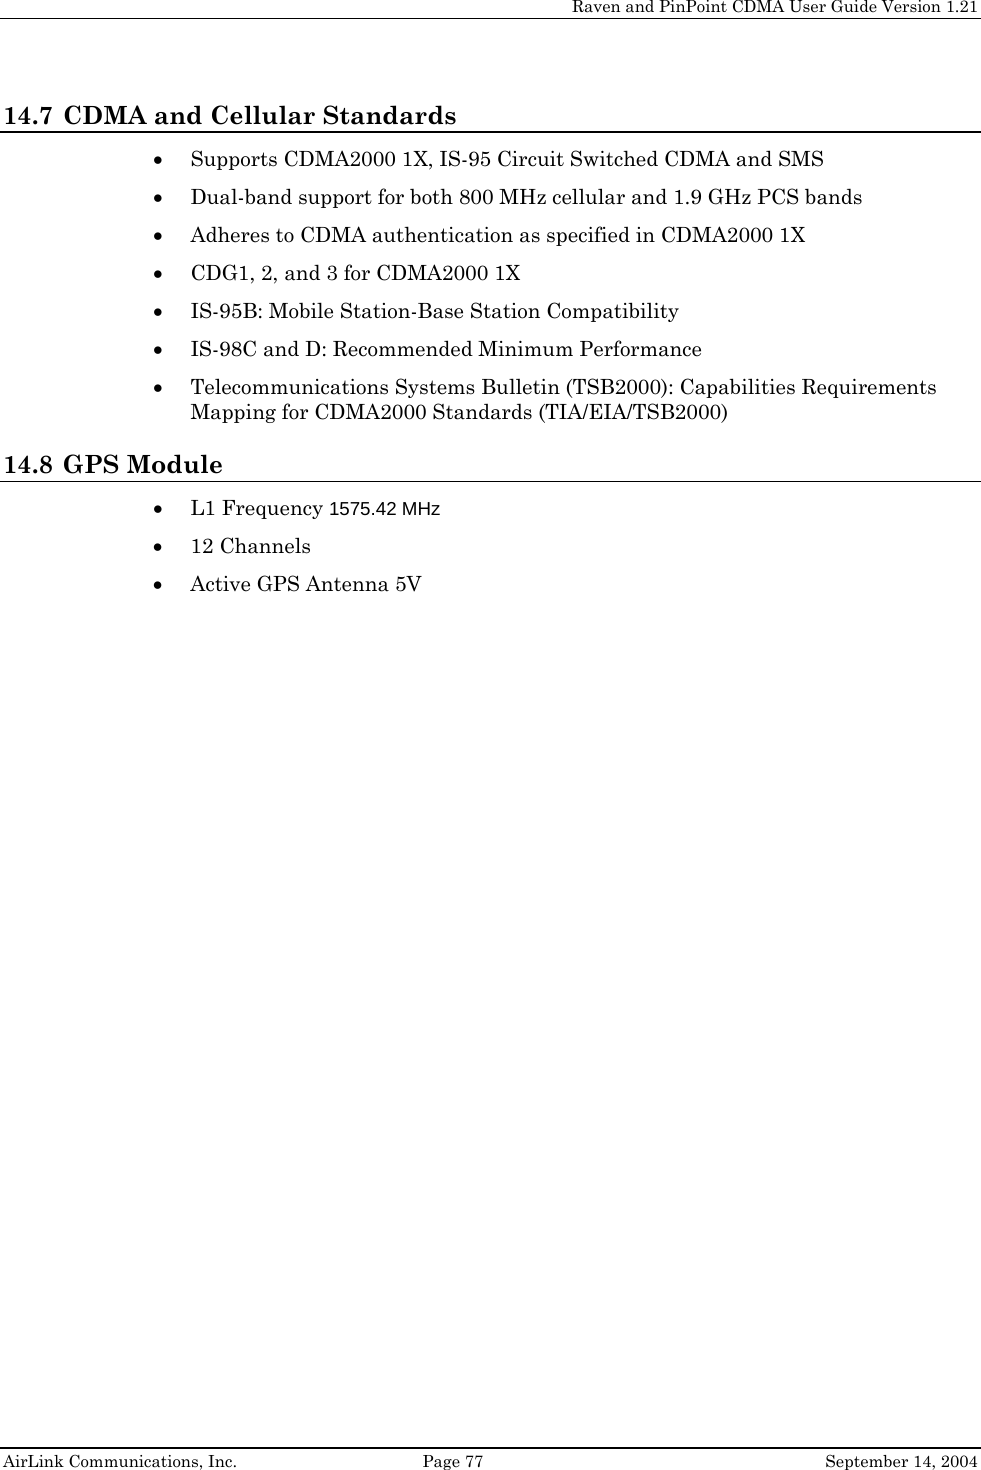     Raven and PinPoint CDMA User Guide Version 1.21  AirLink Communications, Inc.  Page 77  September 14, 2004 14.7 CDMA and Cellular Standards • Supports CDMA2000 1X, IS-95 Circuit Switched CDMA and SMS • Dual-band support for both 800 MHz cellular and 1.9 GHz PCS bands • Adheres to CDMA authentication as specified in CDMA2000 1X • CDG1, 2, and 3 for CDMA2000 1X • IS-95B: Mobile Station-Base Station Compatibility • IS-98C and D: Recommended Minimum Performance • Telecommunications Systems Bulletin (TSB2000): Capabilities Requirements Mapping for CDMA2000 Standards (TIA/EIA/TSB2000) 14.8 GPS Module • L1 Frequency 1575.42 MHz • 12 Channels • Active GPS Antenna 5V   